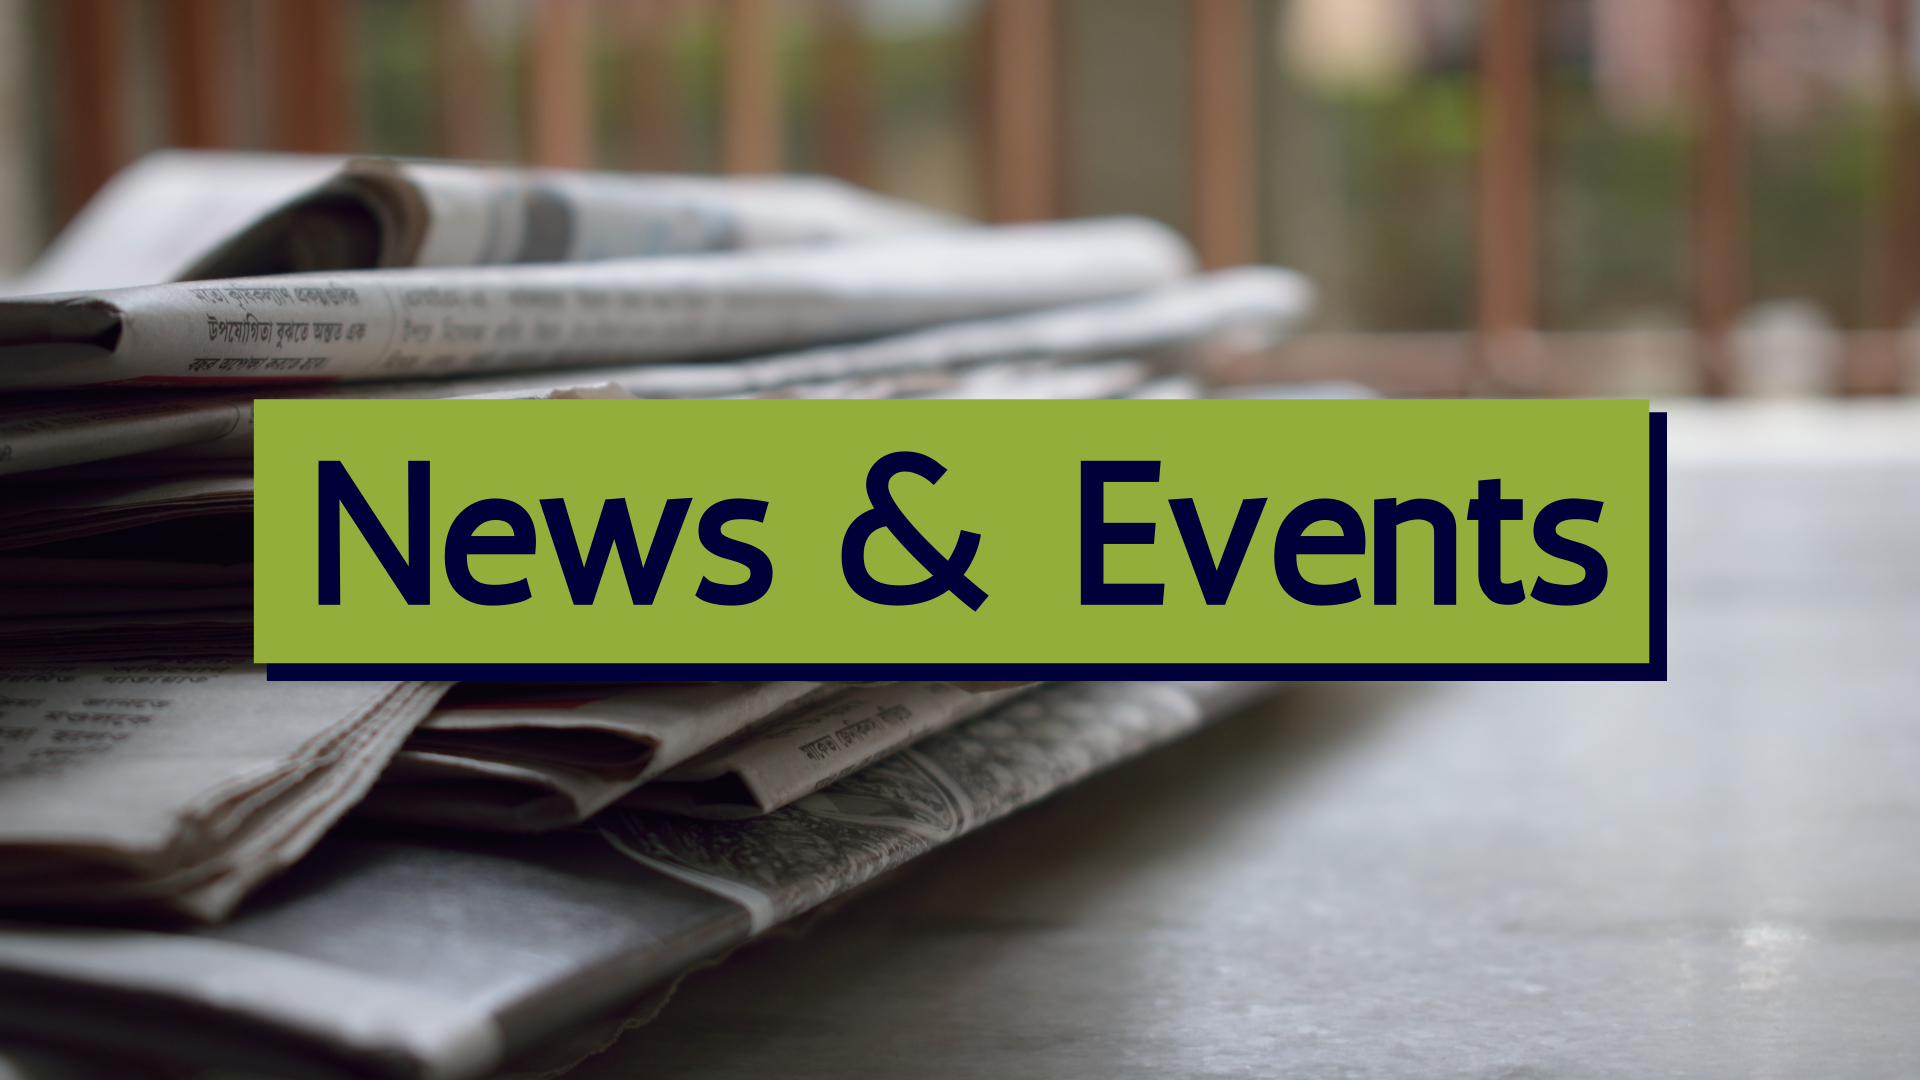 Link to the News & Events page